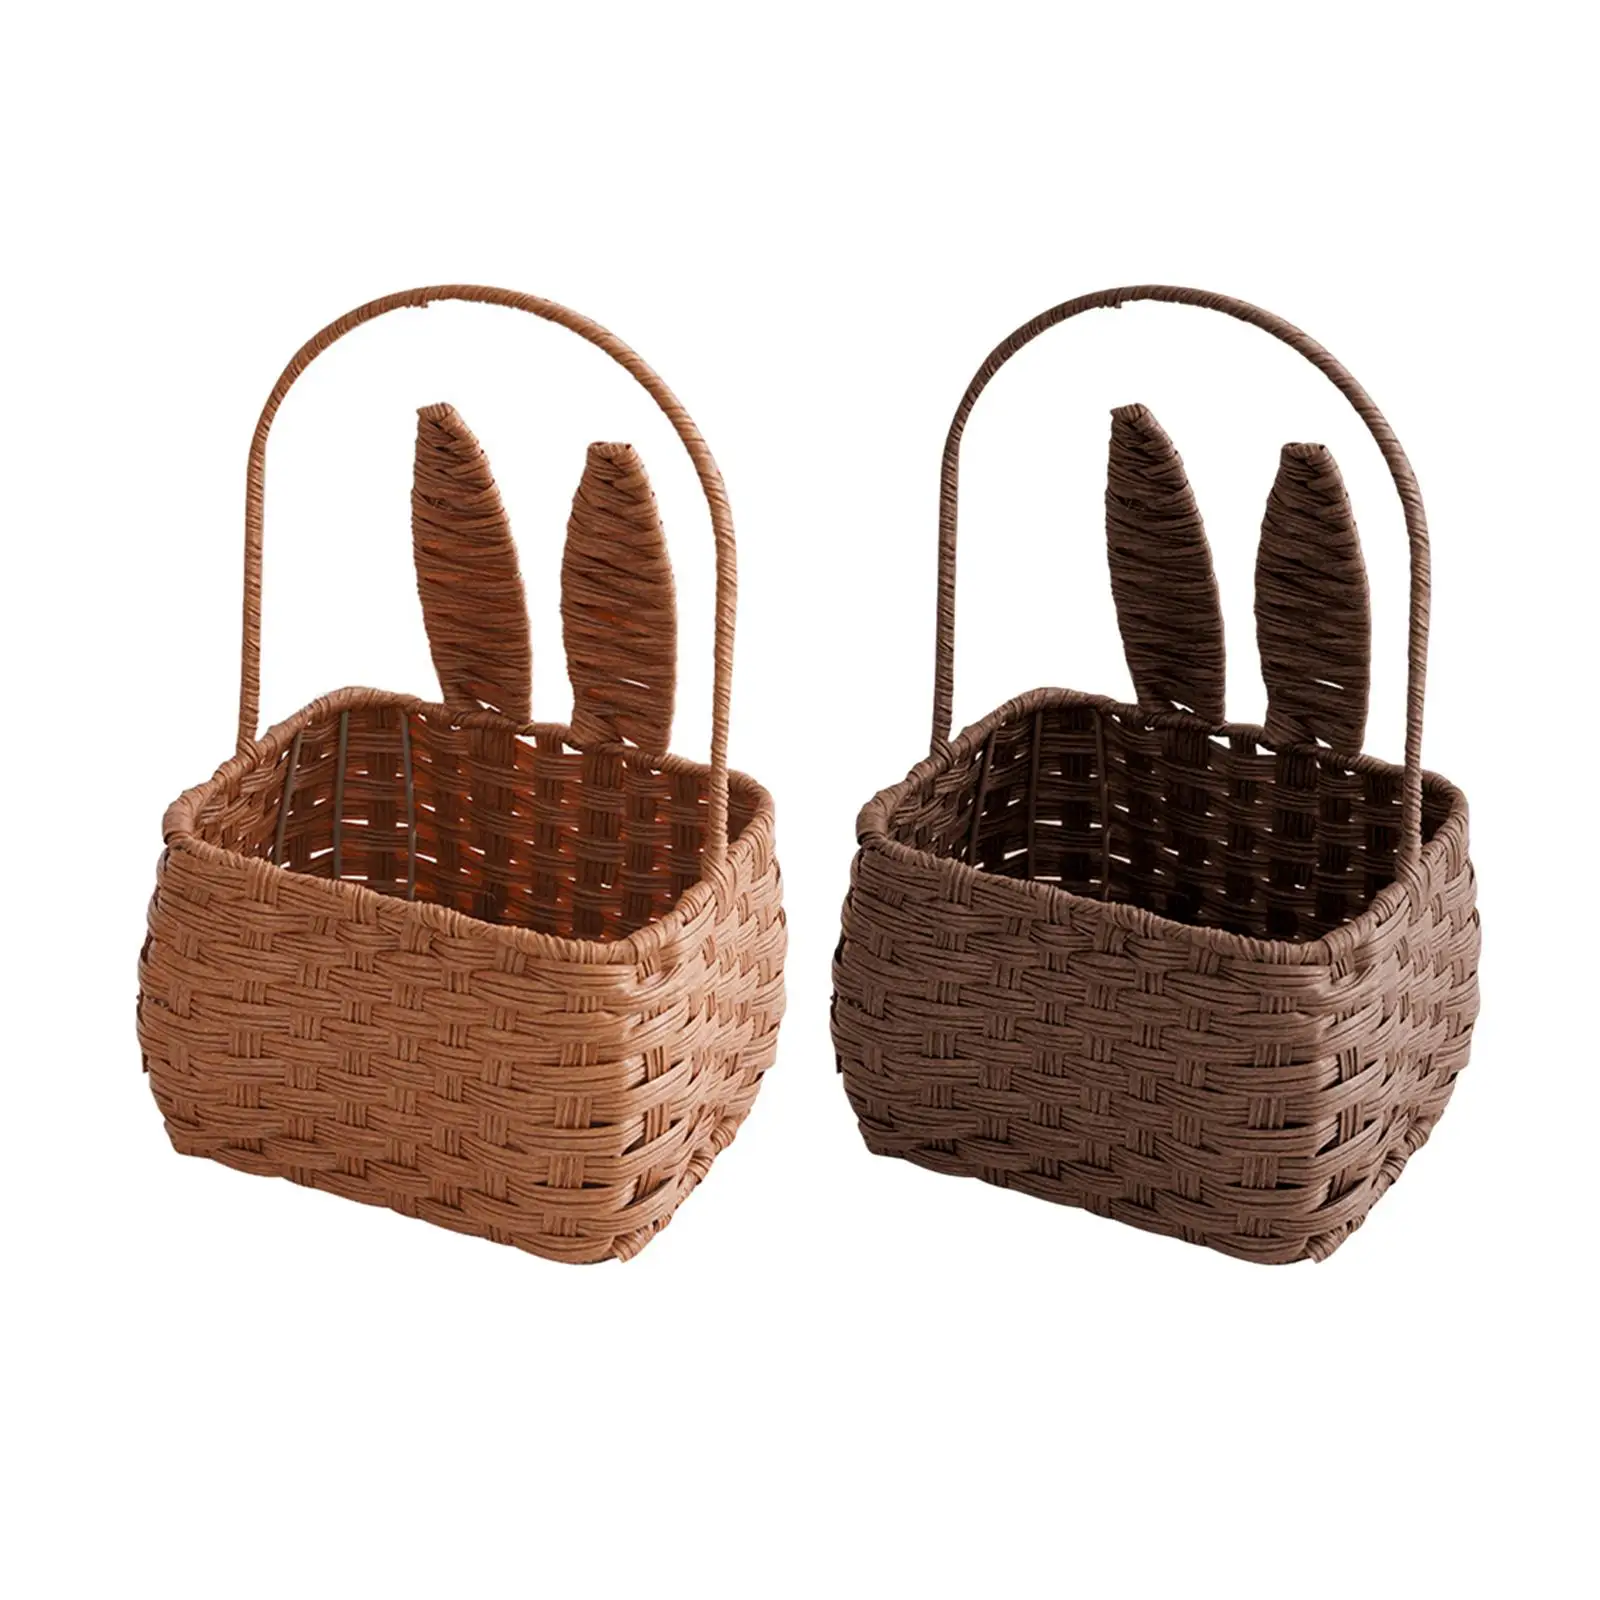 Cute Bunny Easter Basket Handmade Container Eggs Candy Storage for Fruit Vegetable Concert Family Wedding Garden Decoration